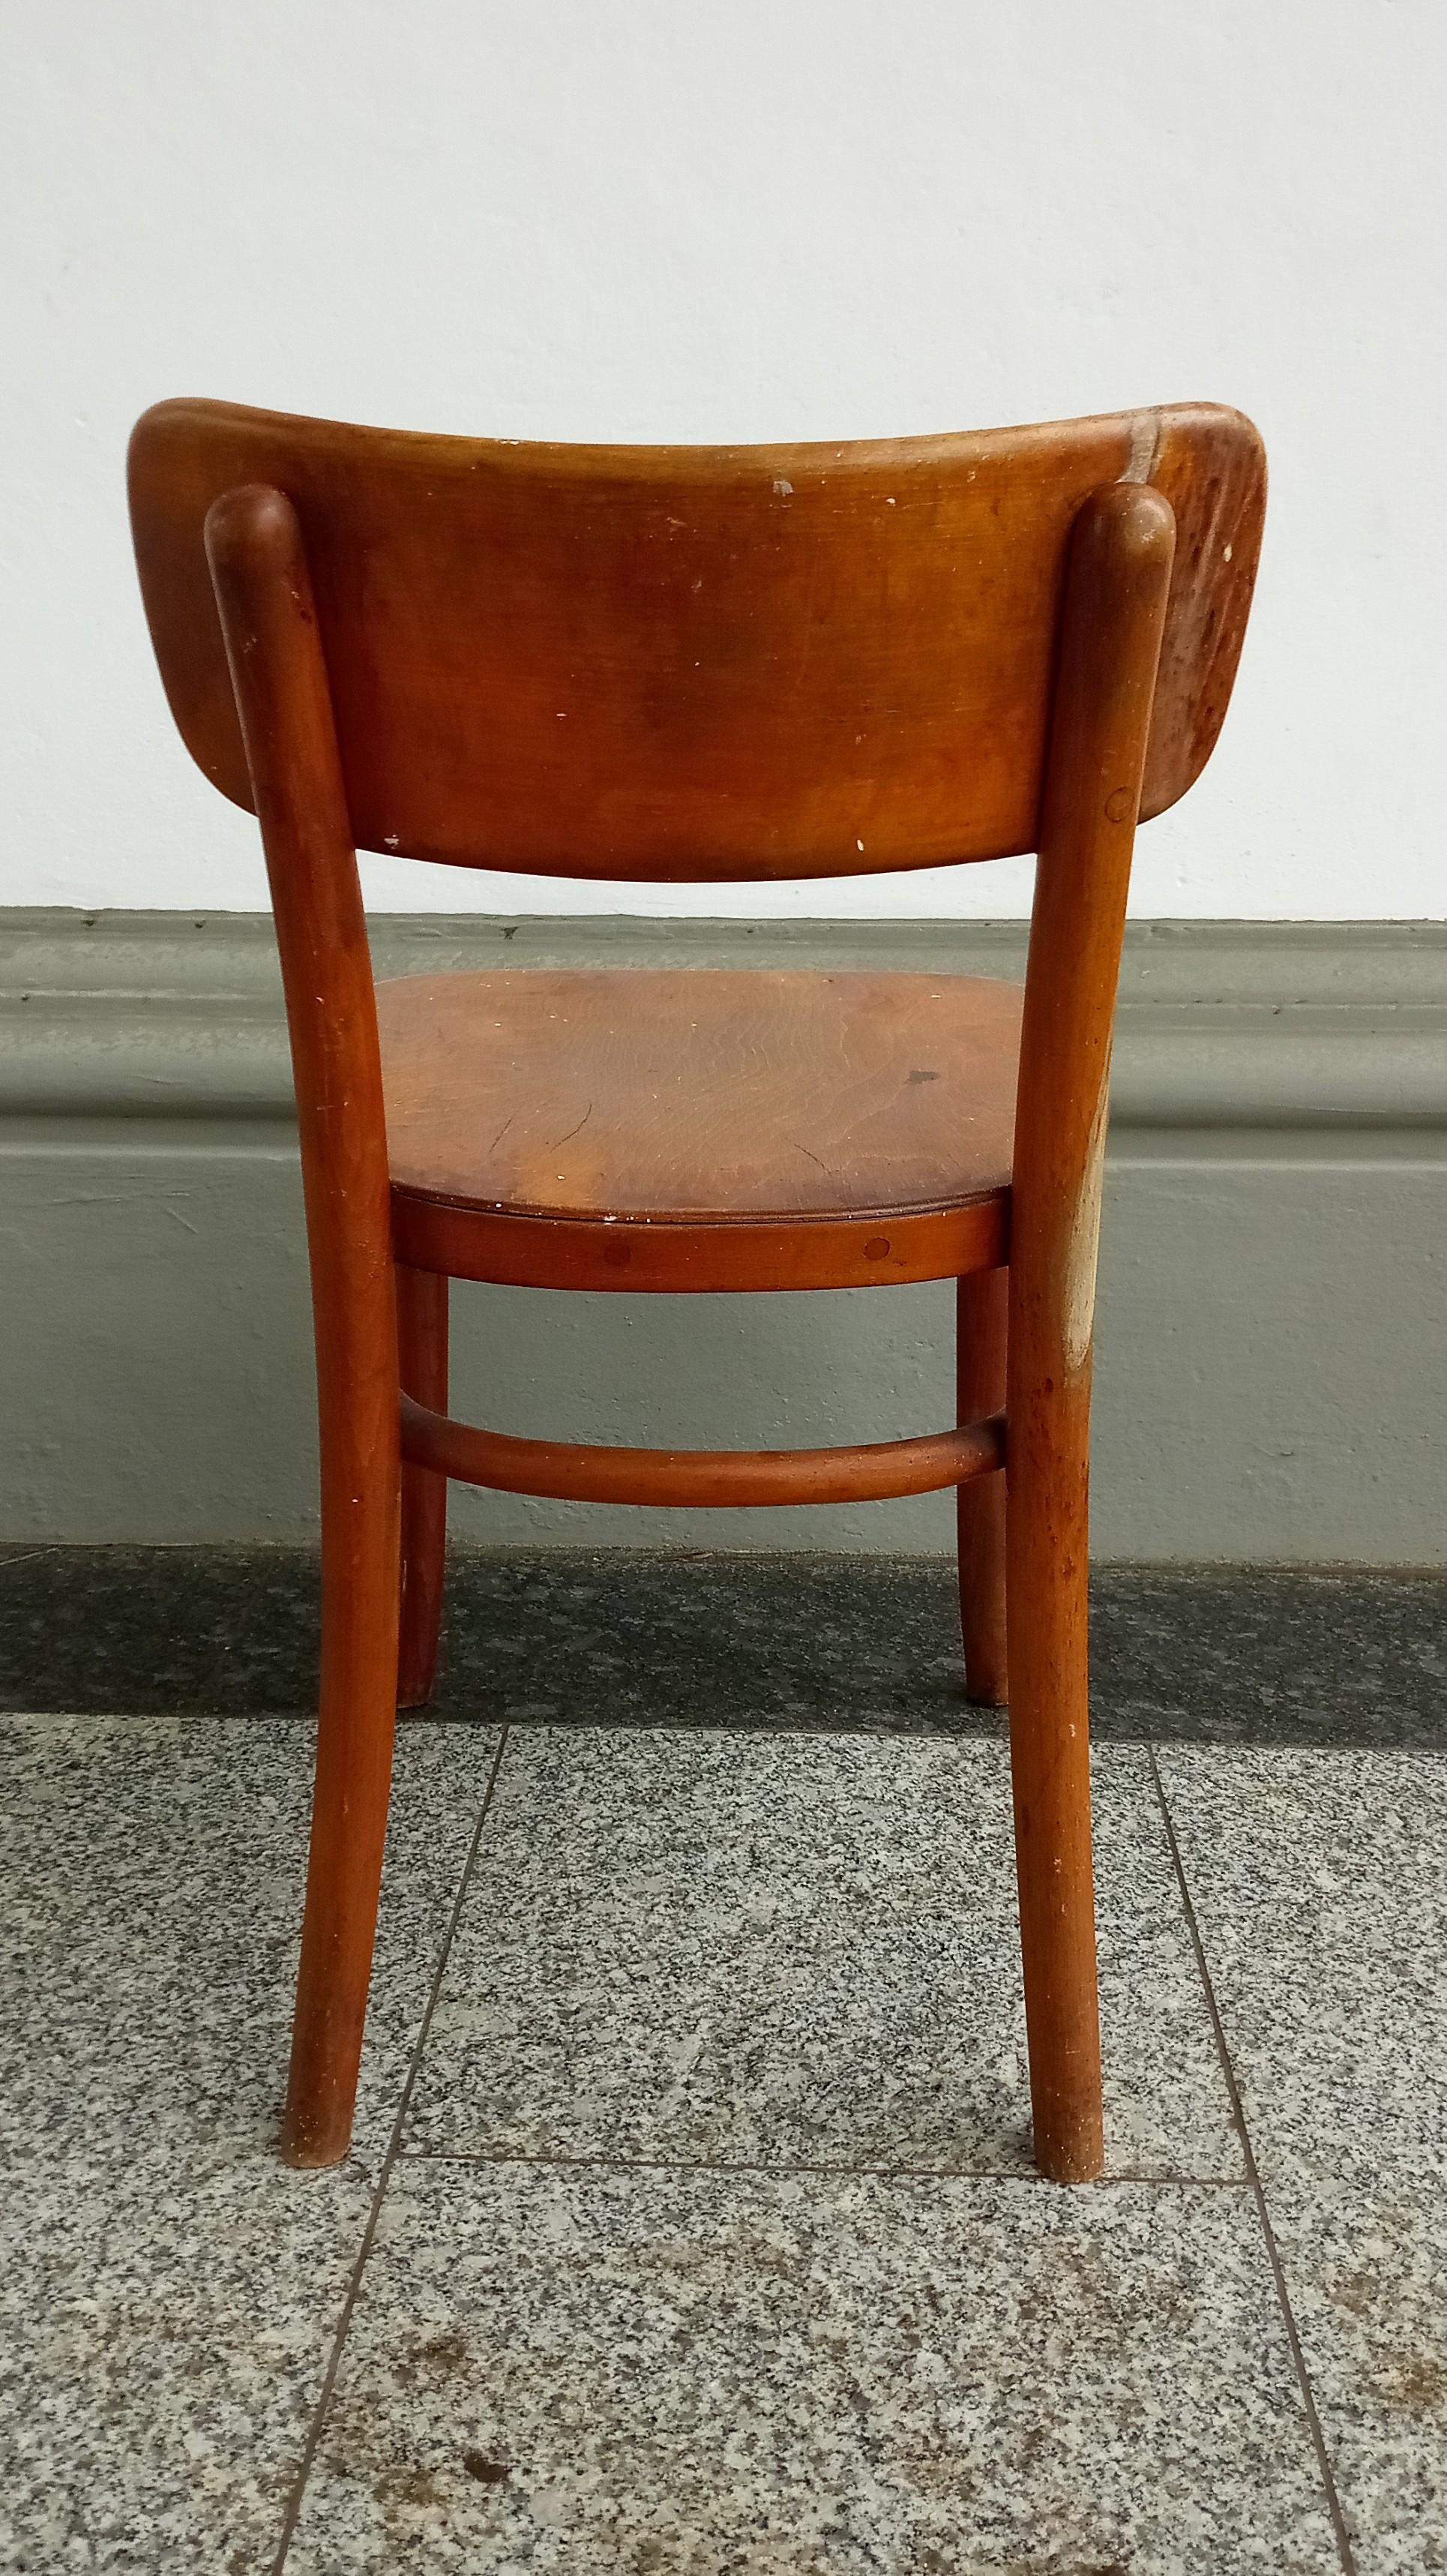 Carved Bentwood Model 234 Chair by Magnus Stephensen for Fritz Hansen, 1920s For Sale